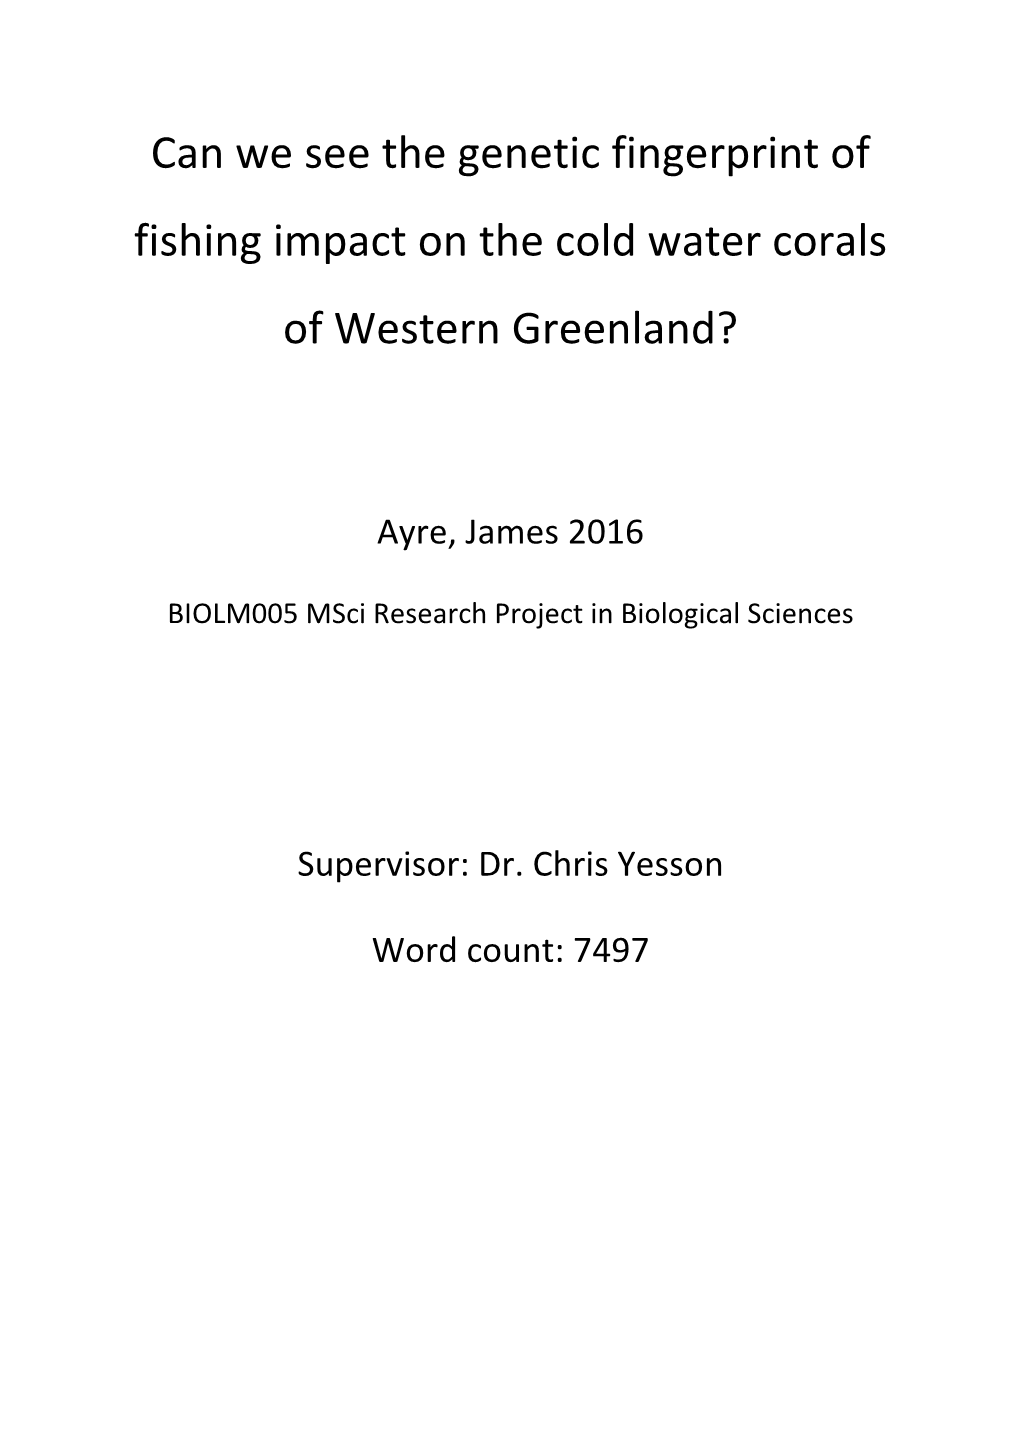 Can We See the Genetic Fingerprint of Fishing Impact on the Cold Water Corals of Western Greenland?